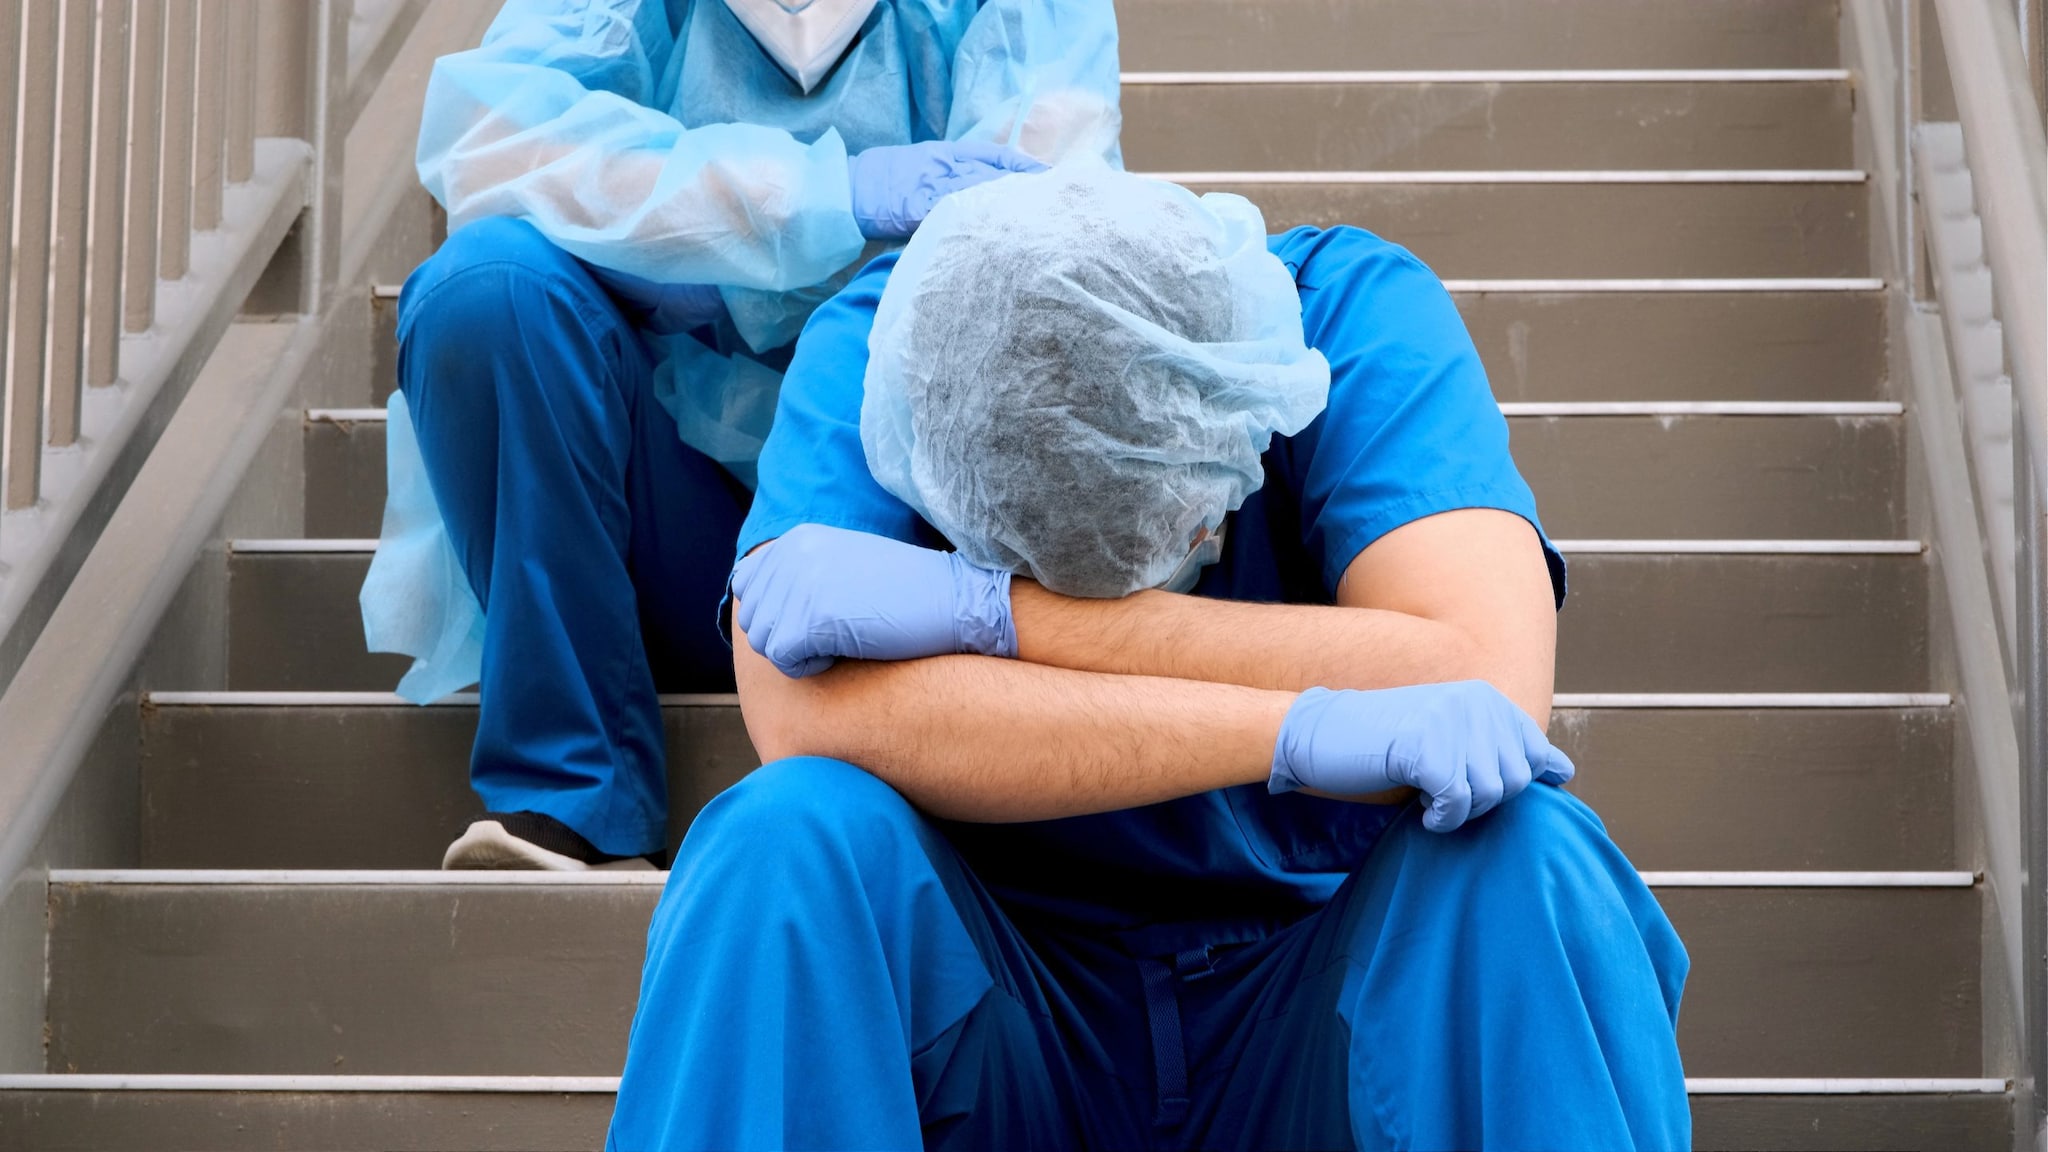 Two overworked healthcare workers sitting on stairs.